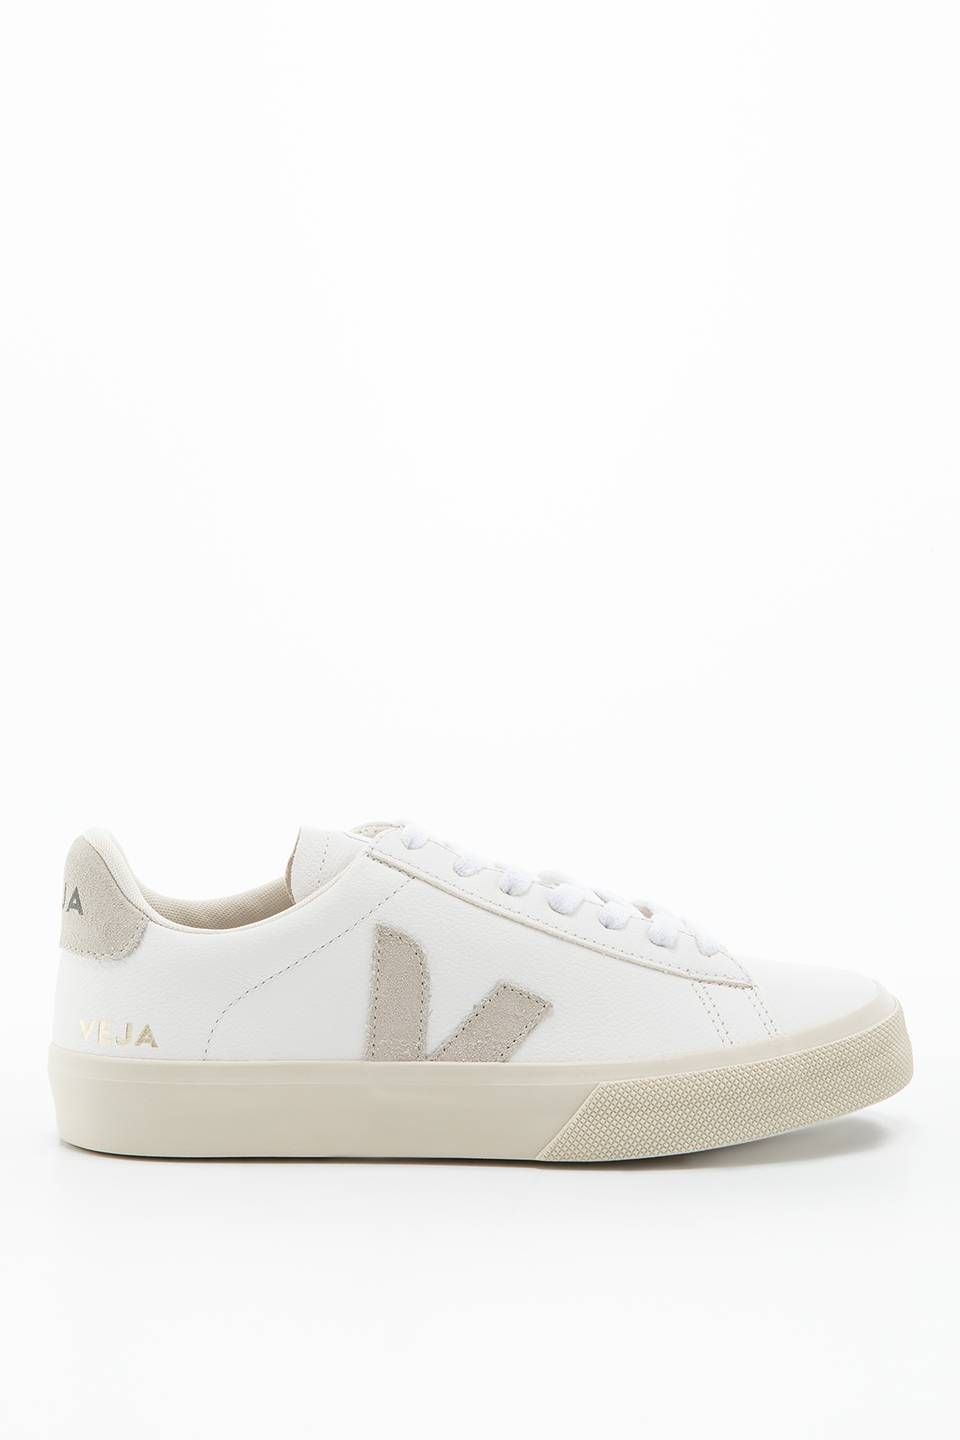 Sneakers Veja CAMPO CHROMEFREE EXTRA-WHIITE-NATURAL-SUEDE CP0502429A